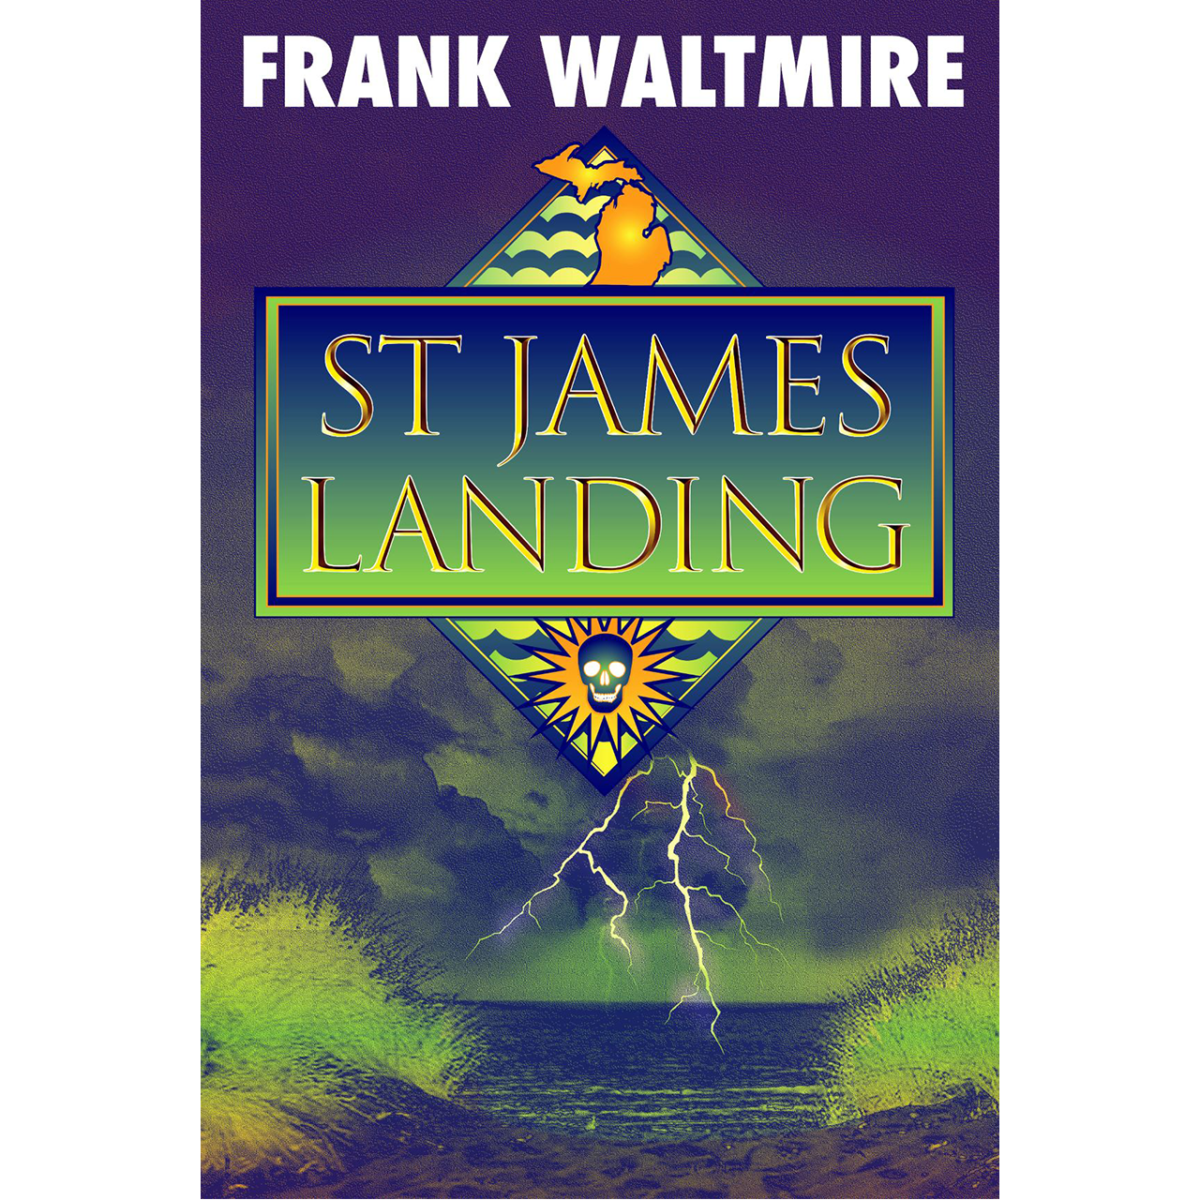 St James Landing by Frank Waltmire